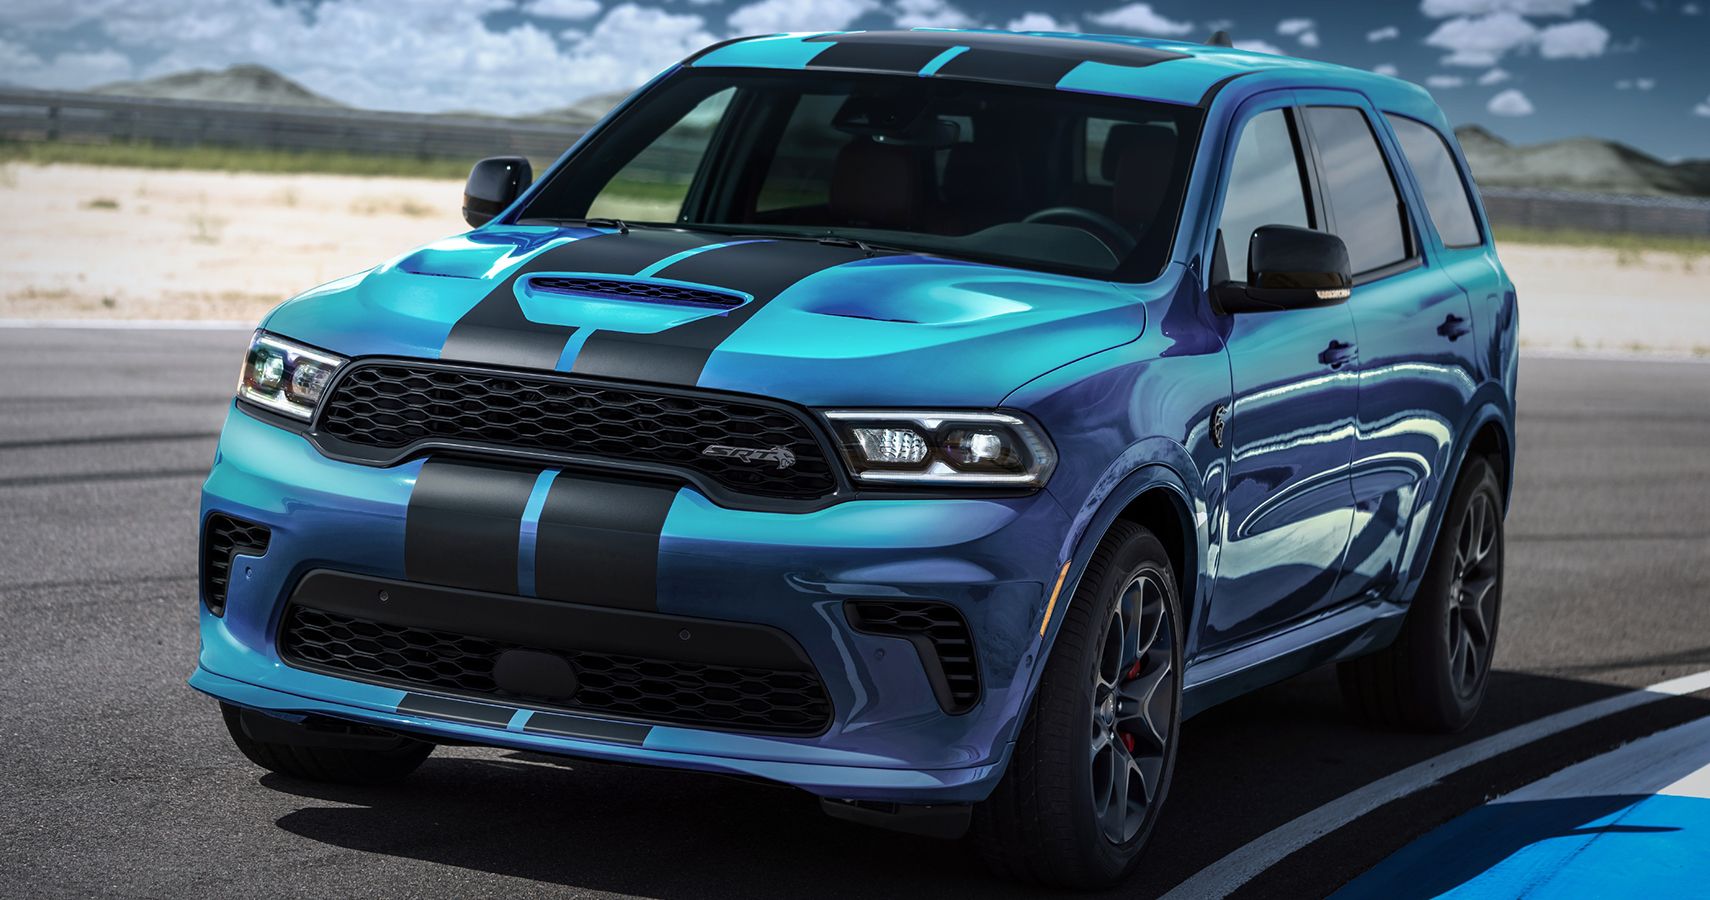 dodge-durango-srt-hellcat-is-back-for-2023-with-new-colors